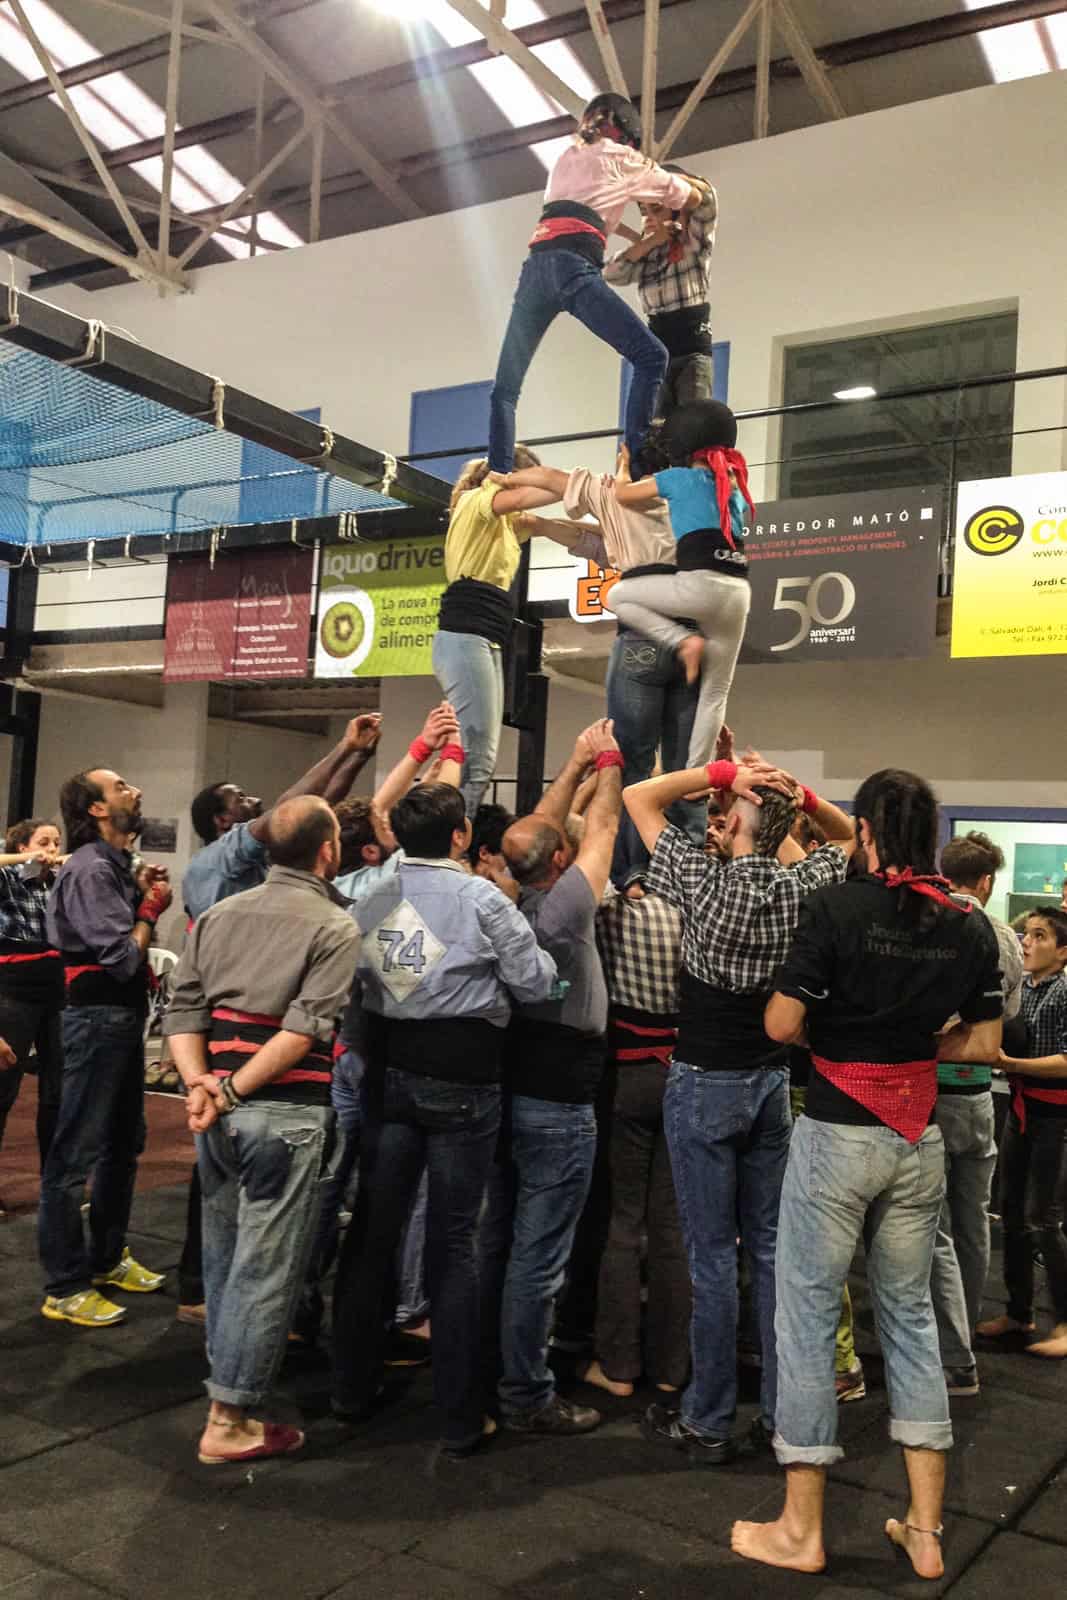 A group of people holding up others as part of the Catalan Human towers tradition in Girona, Spain.